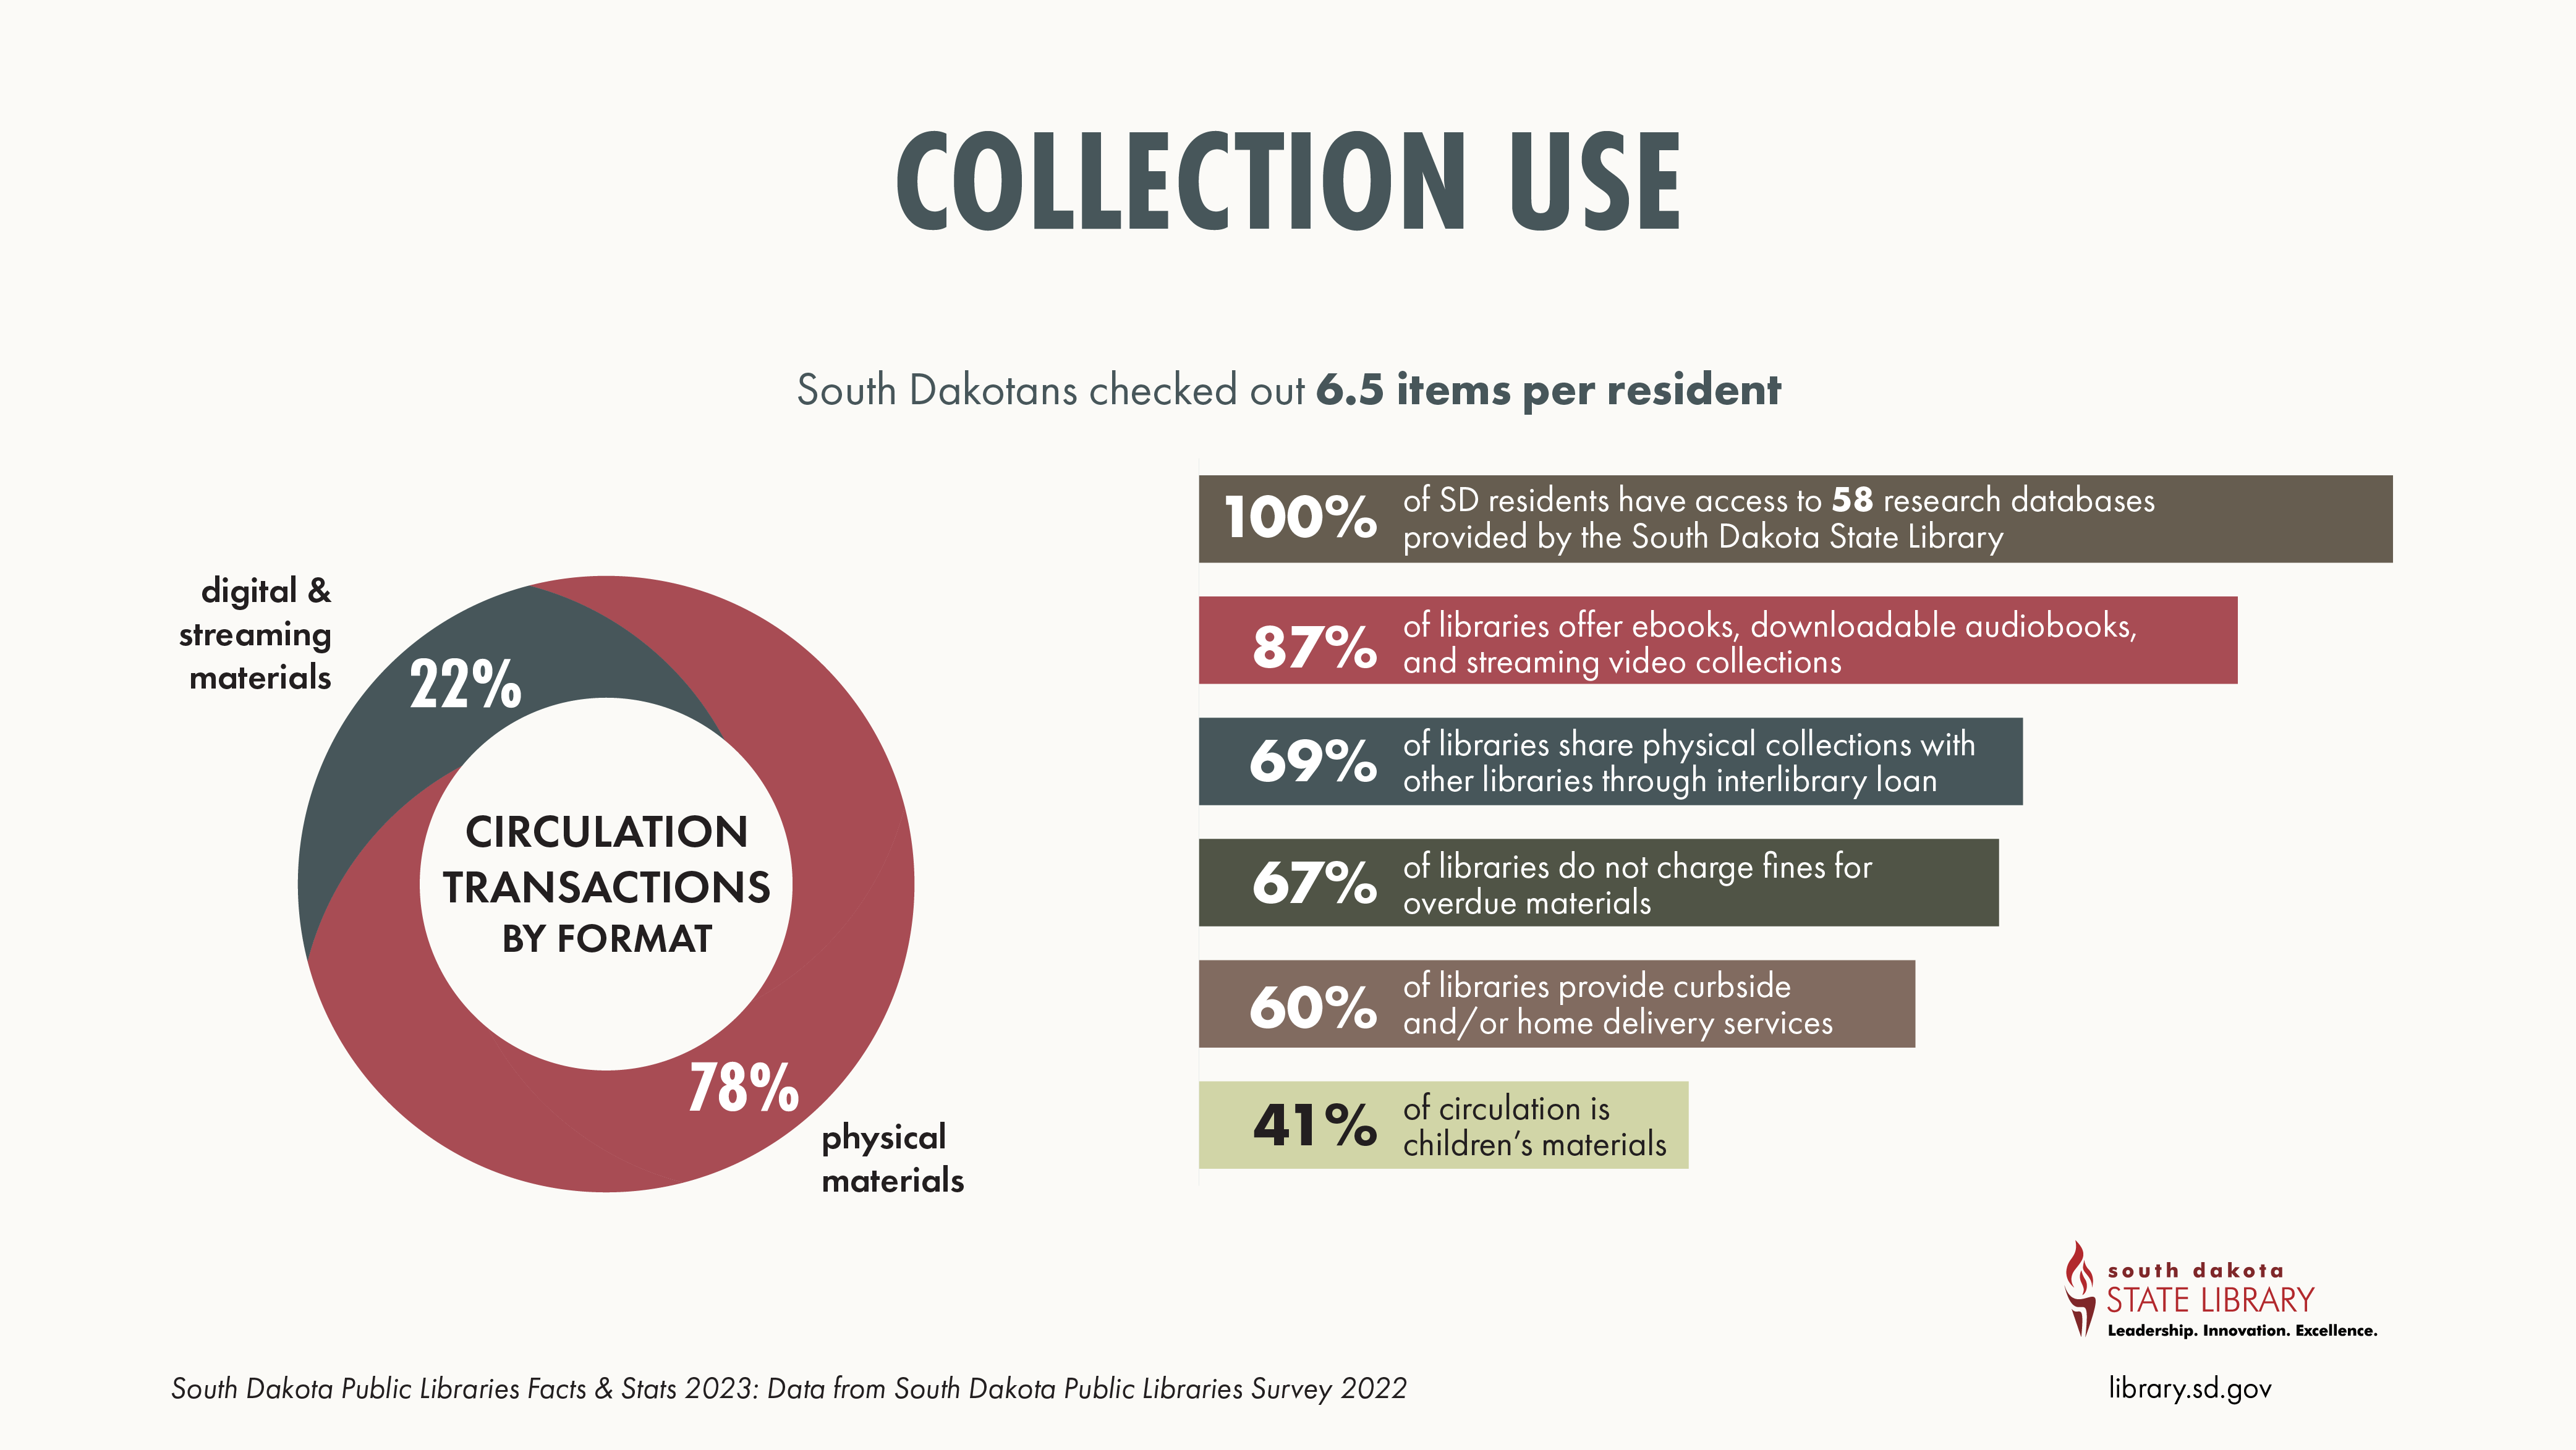 south dakotans checked out 6.5 items per resident